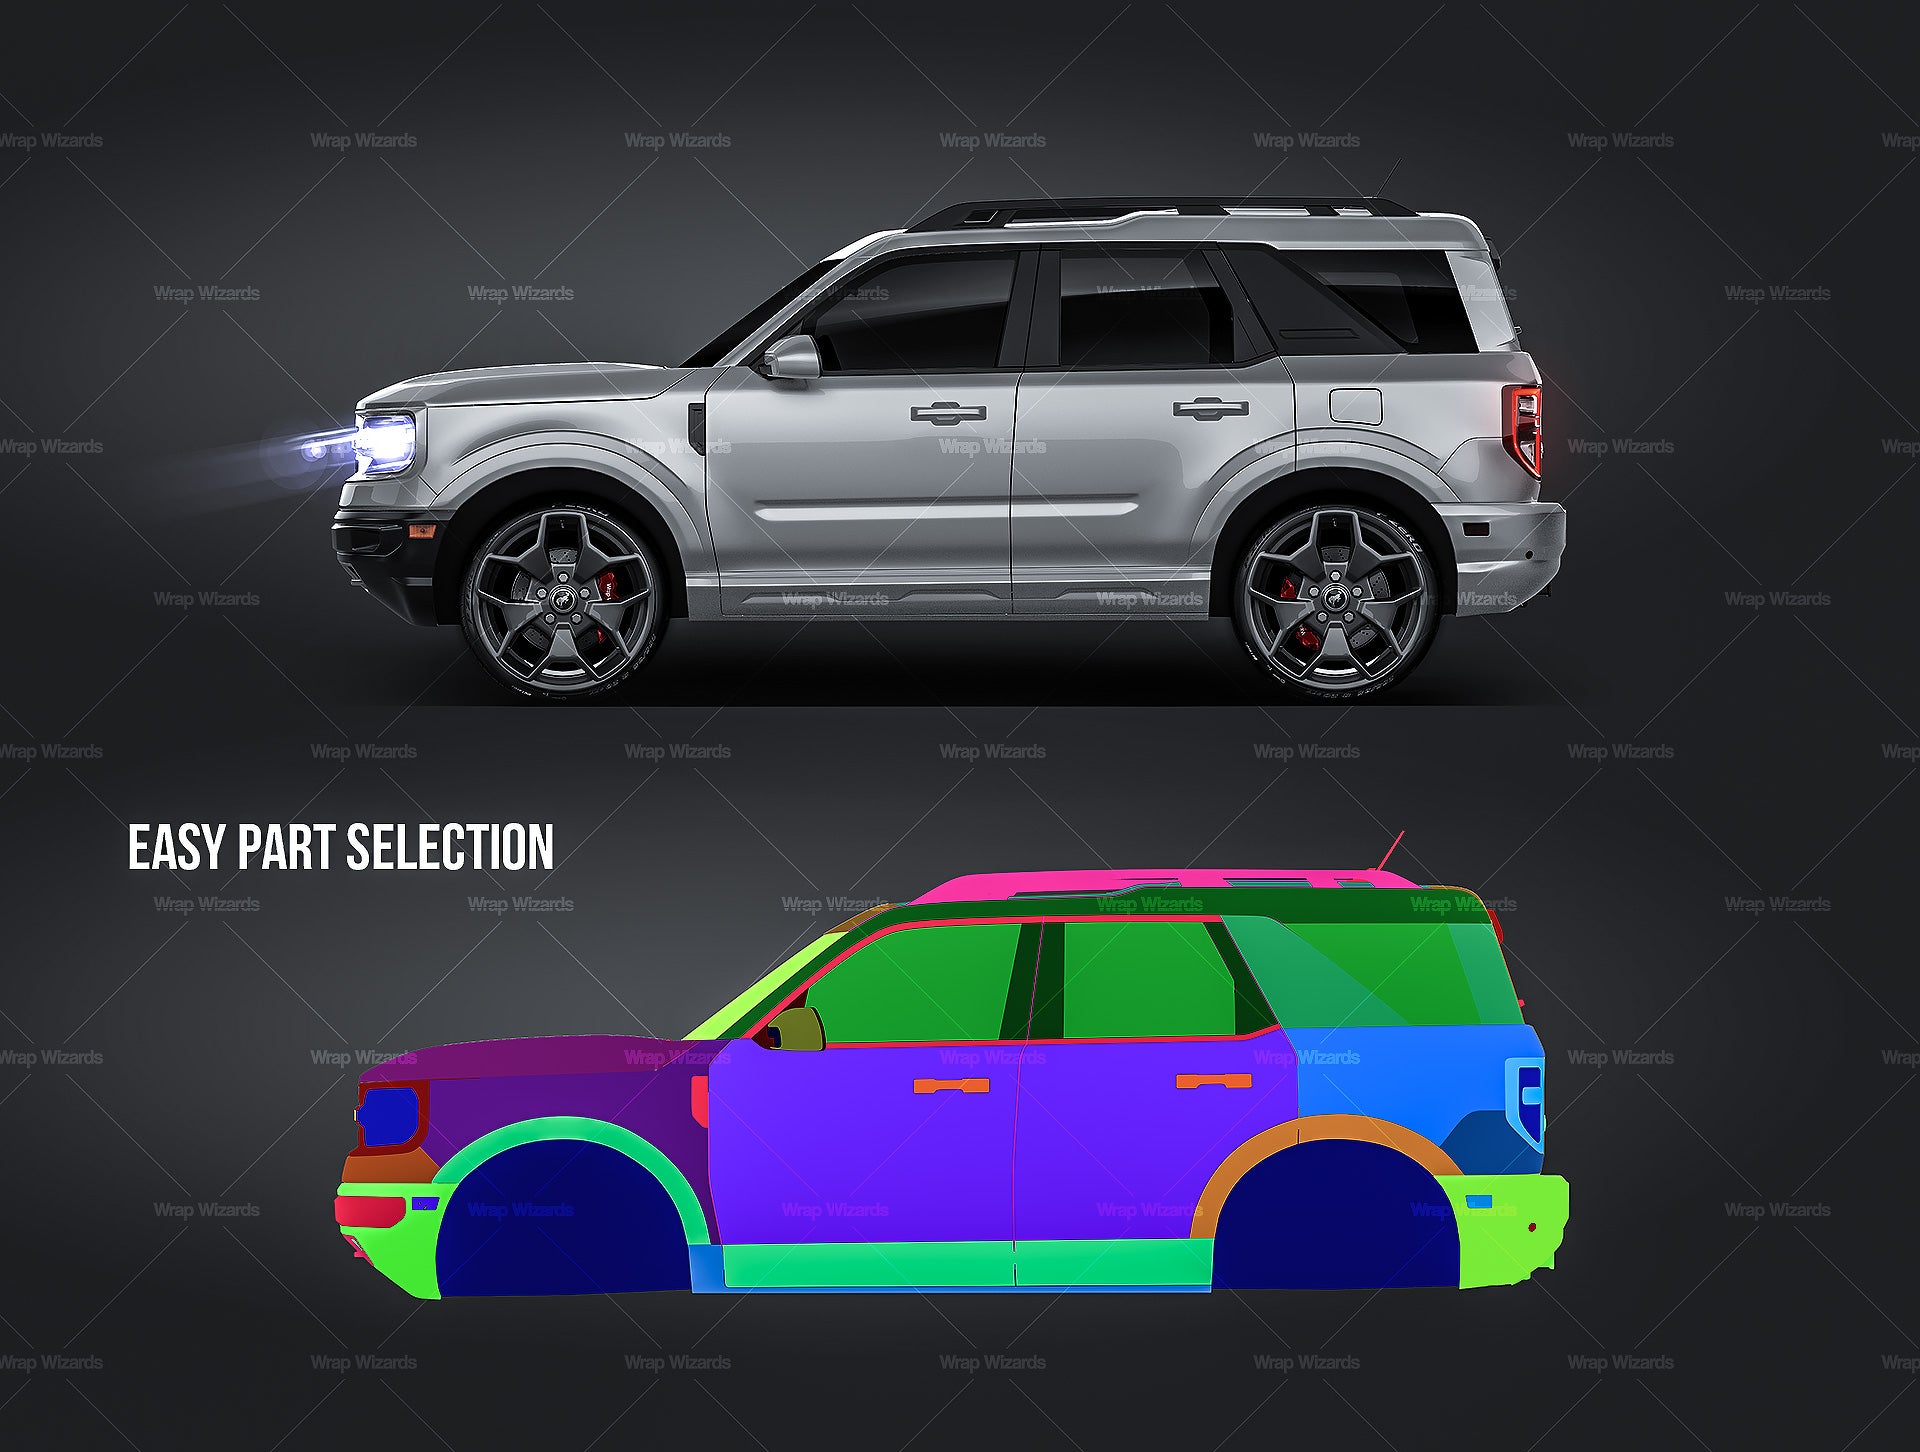 Ford Bronco Sport First Edition 2021 glossy finish - all sides Car Mockup Template.psd